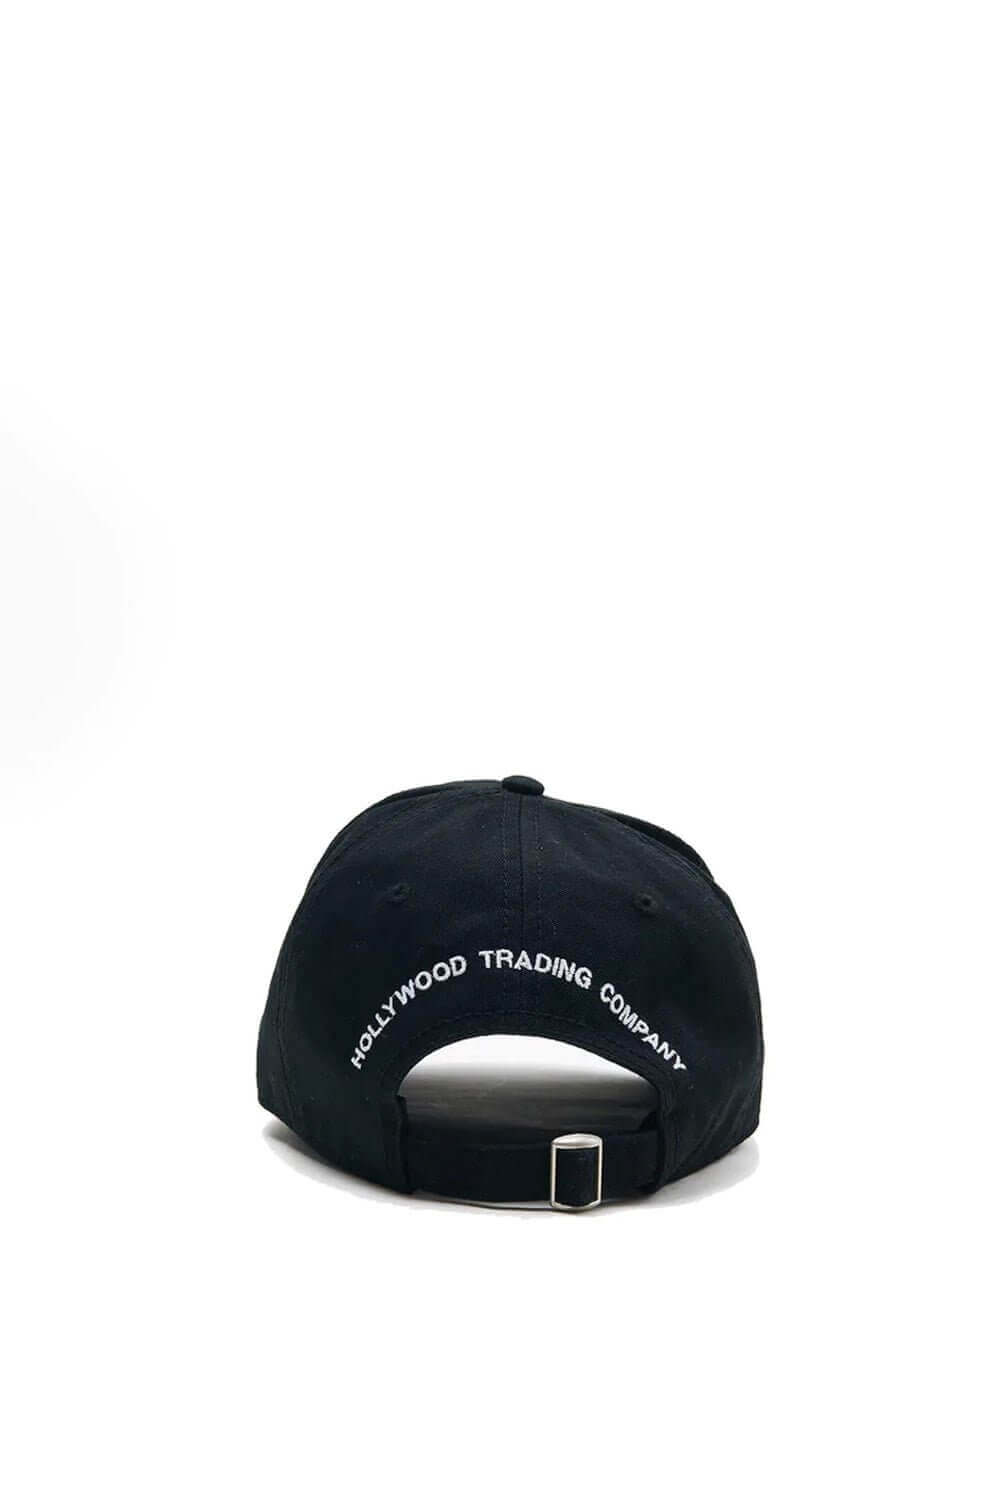 HTC LOGO BASEBALL CAP Black baseball cap with preformed peak, round crown with eyelets, HTC Los Angeles shield logo embroidered on the front, adjustable strap on the back. One size fits all. 100% cotton. HTC LOS ANGELES